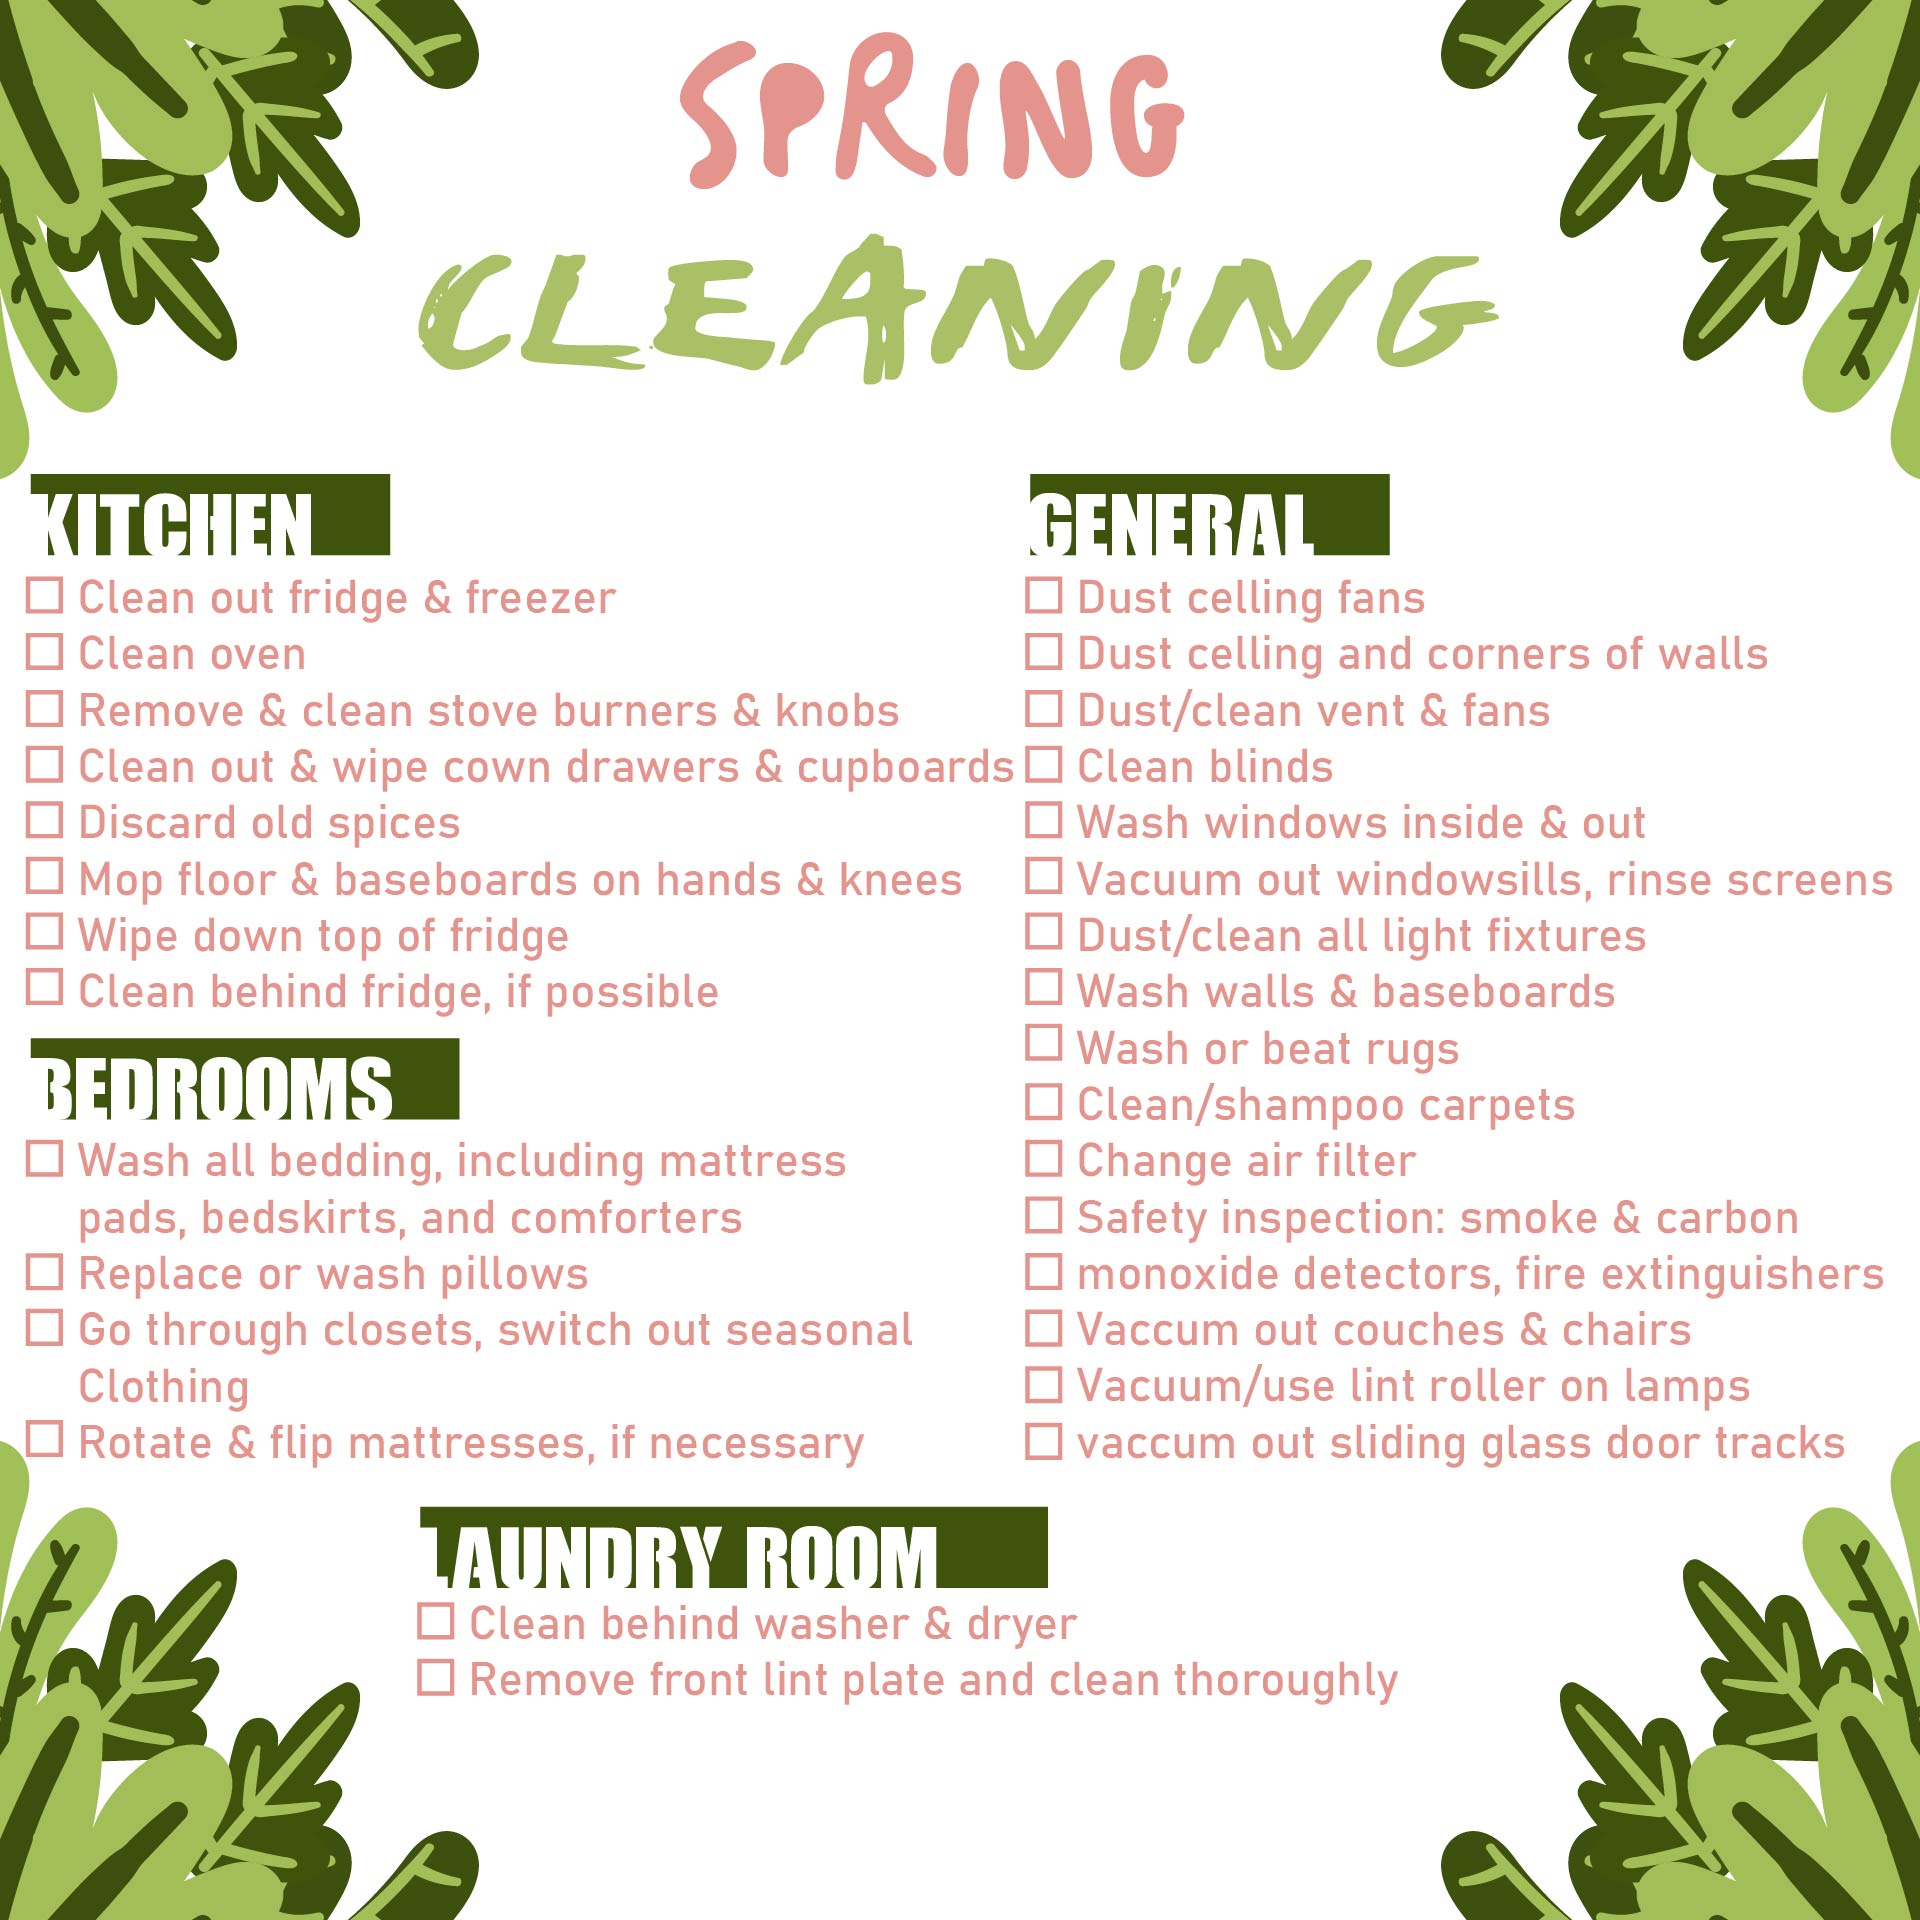 Spring Cleaning Checklist Printable